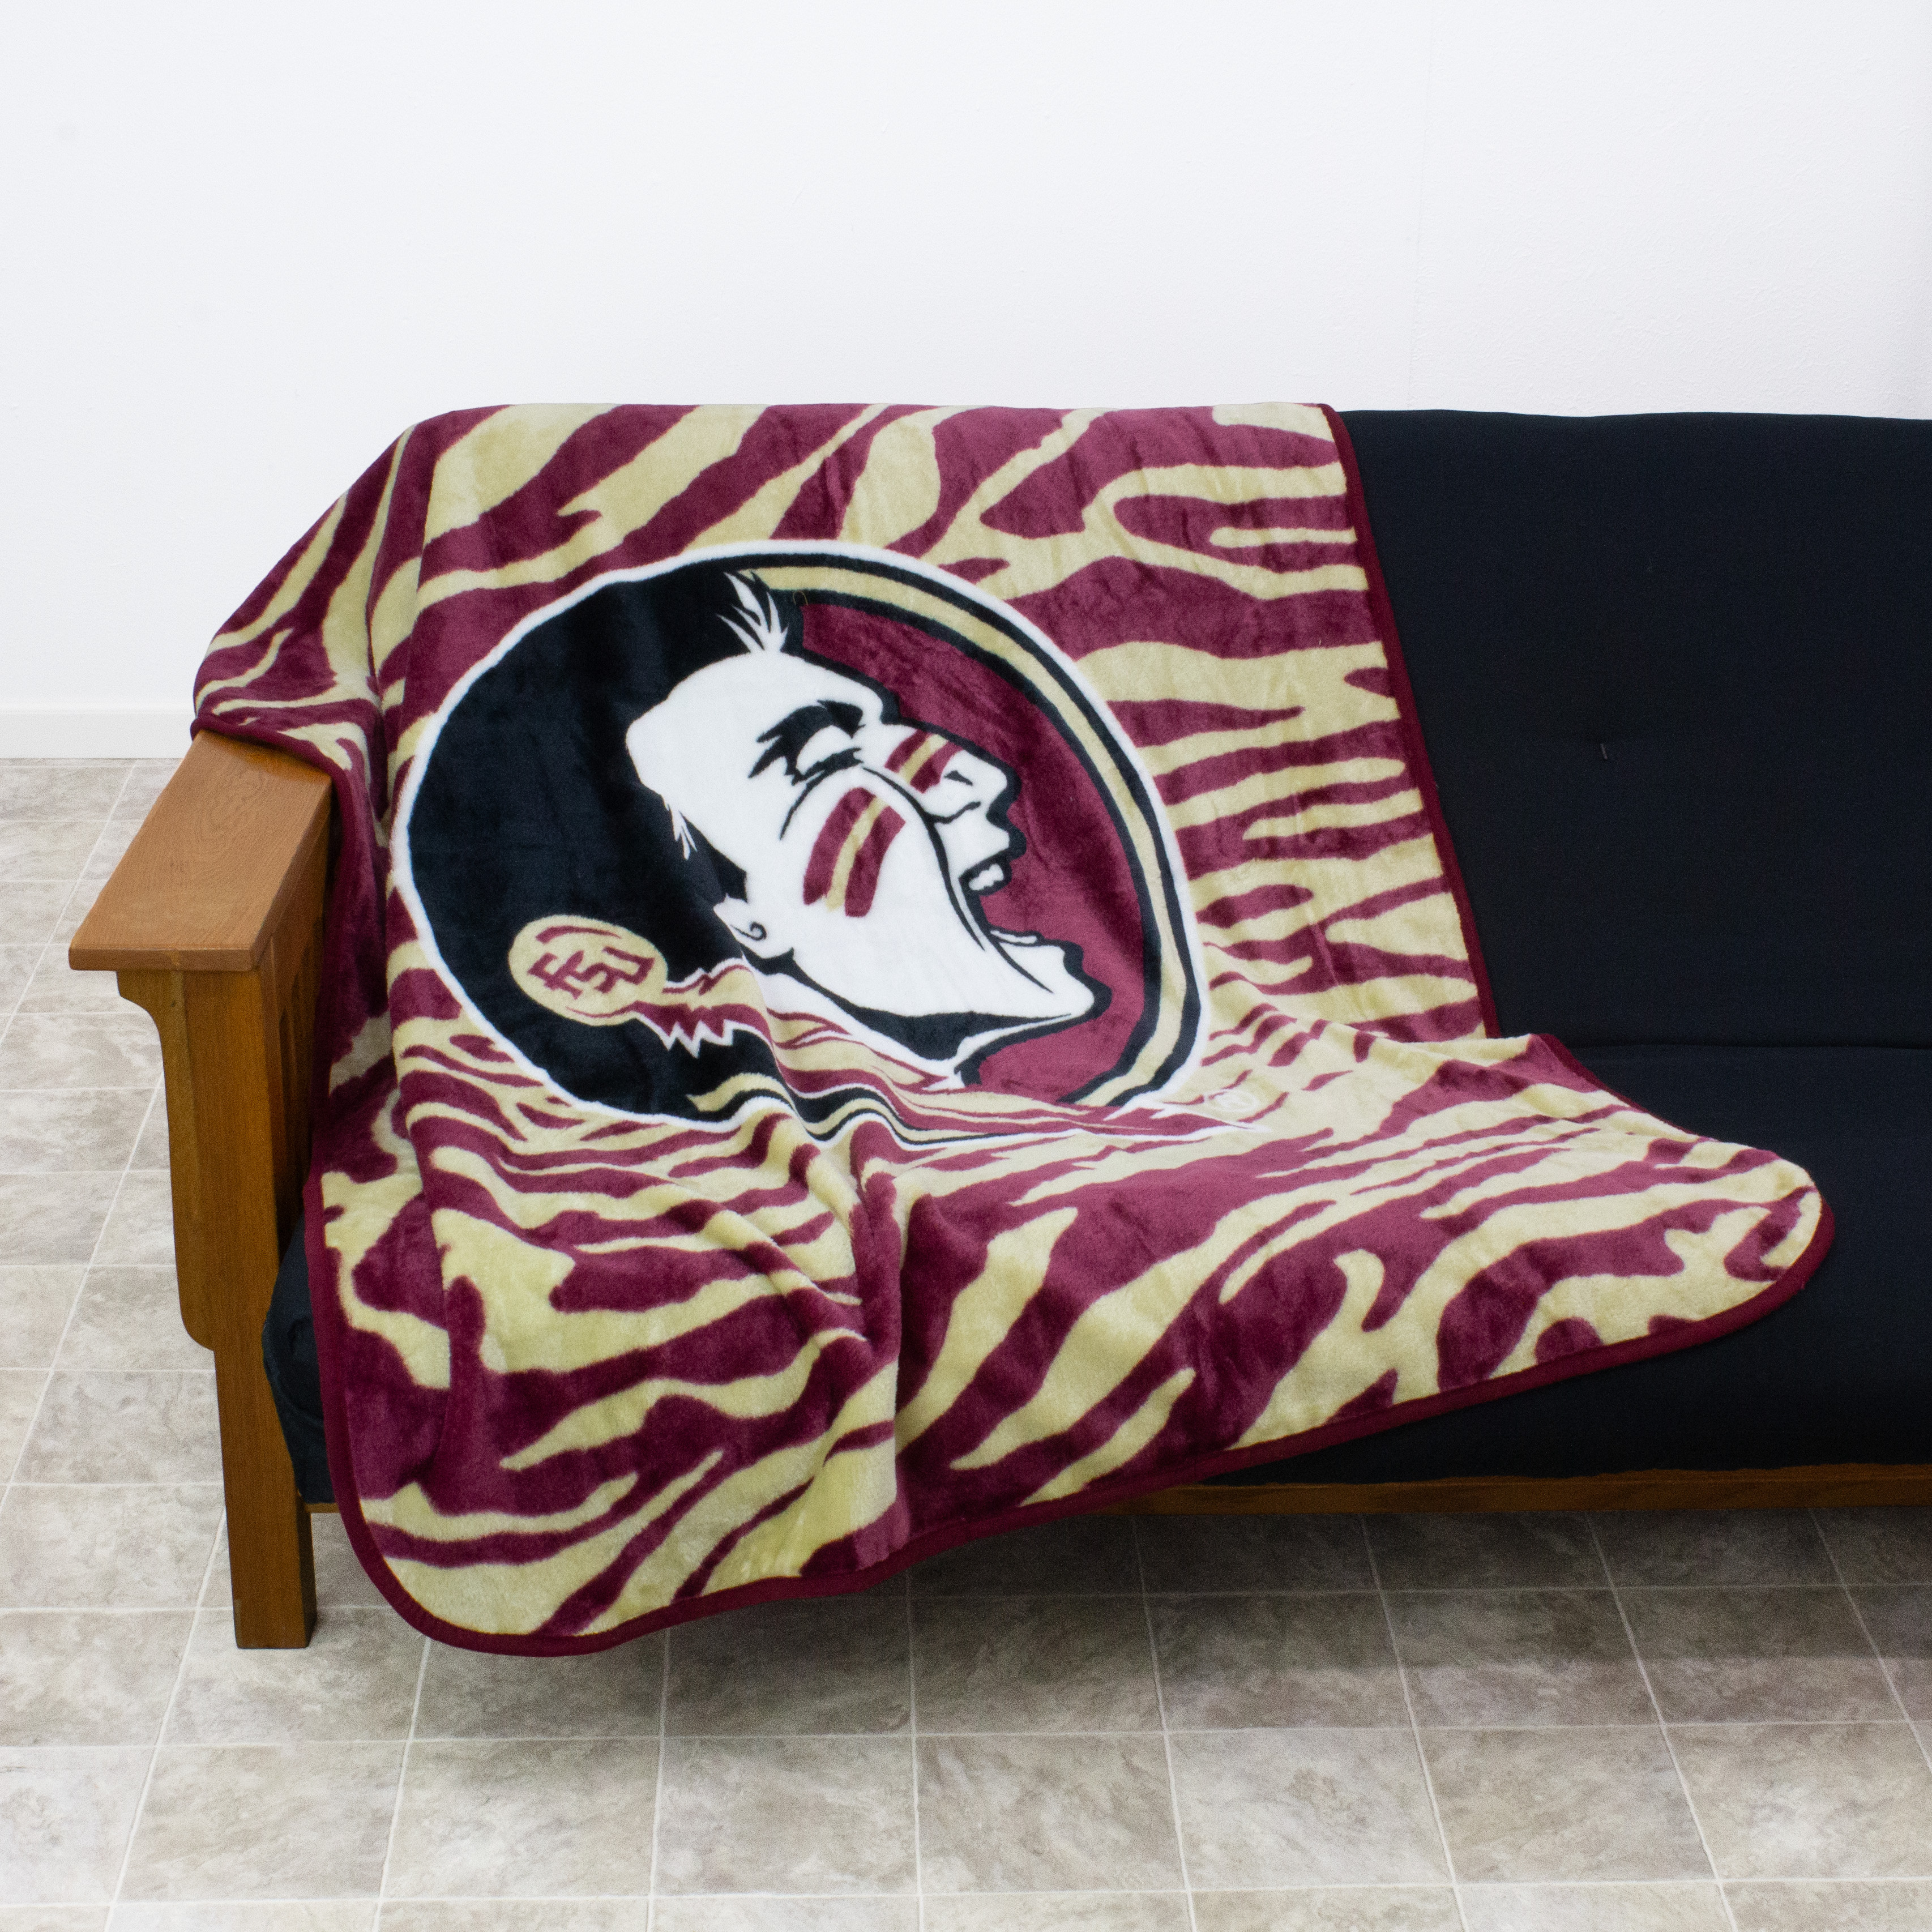 College Covers Everything Comfy Florida State Seminoles Soft Raschel Throw Blanket, 60" x 50" - image 3 of 8